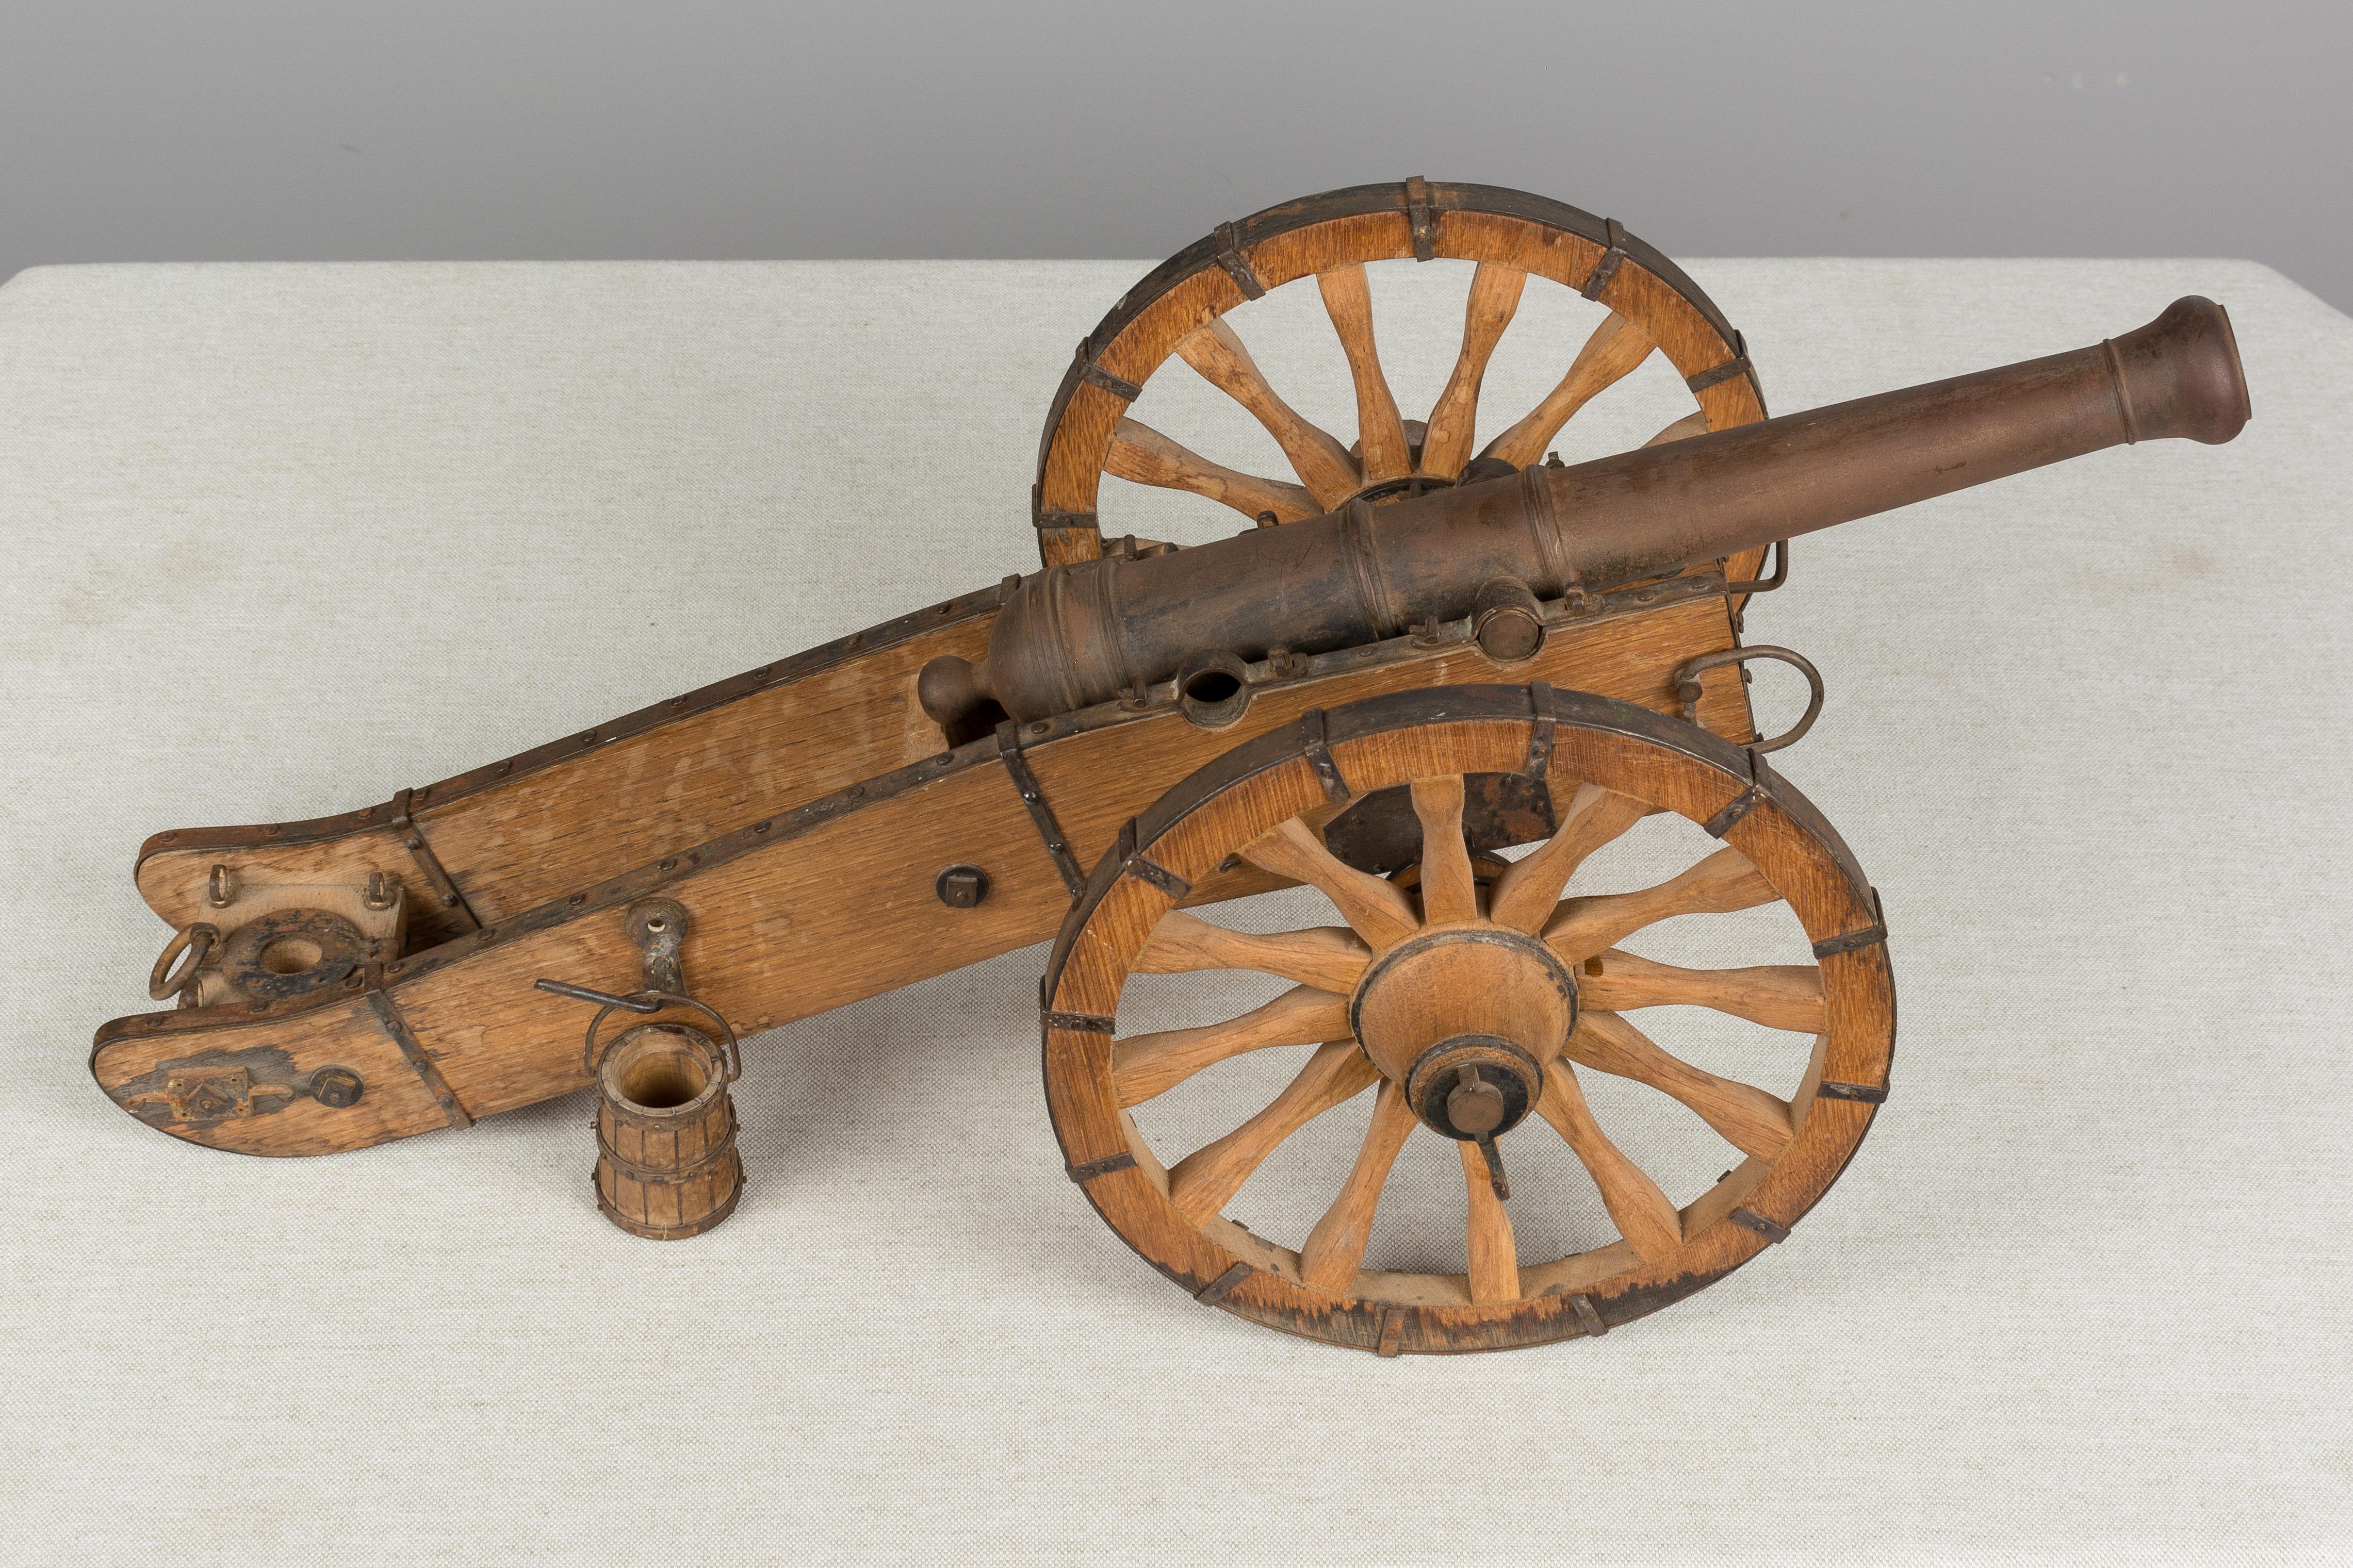 A French miniature model cannon made of iron with wood frame and trimmed in steel with rivets. In good condition with some water damage to wheels and rusty patina to iron. There is a missing bracket underneath that holds one of the wheels. Diameter